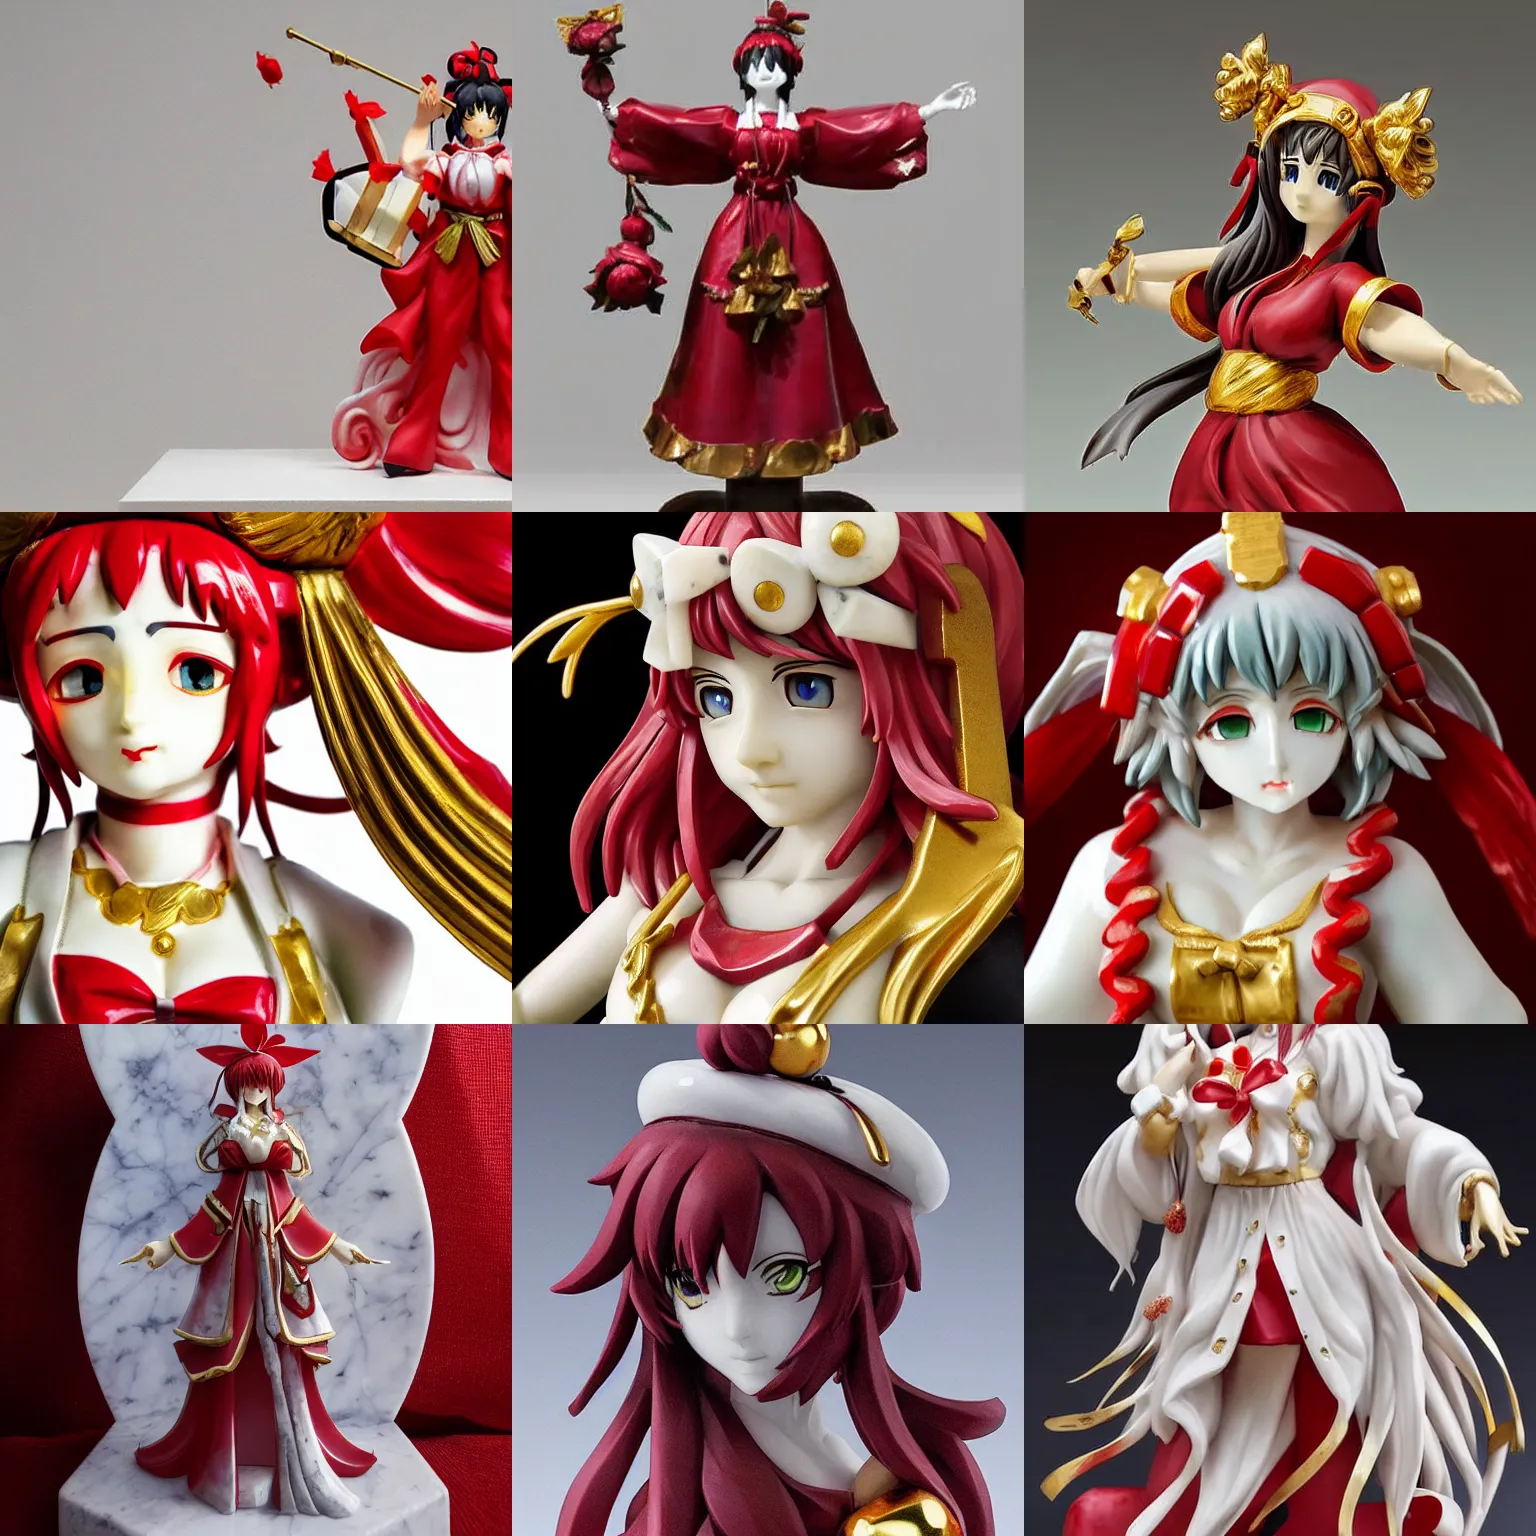 Prompt: a sculpture of reimu hakurei, marble, gold, masterpiece, ultra realistic, hyperrealistic, extreme details